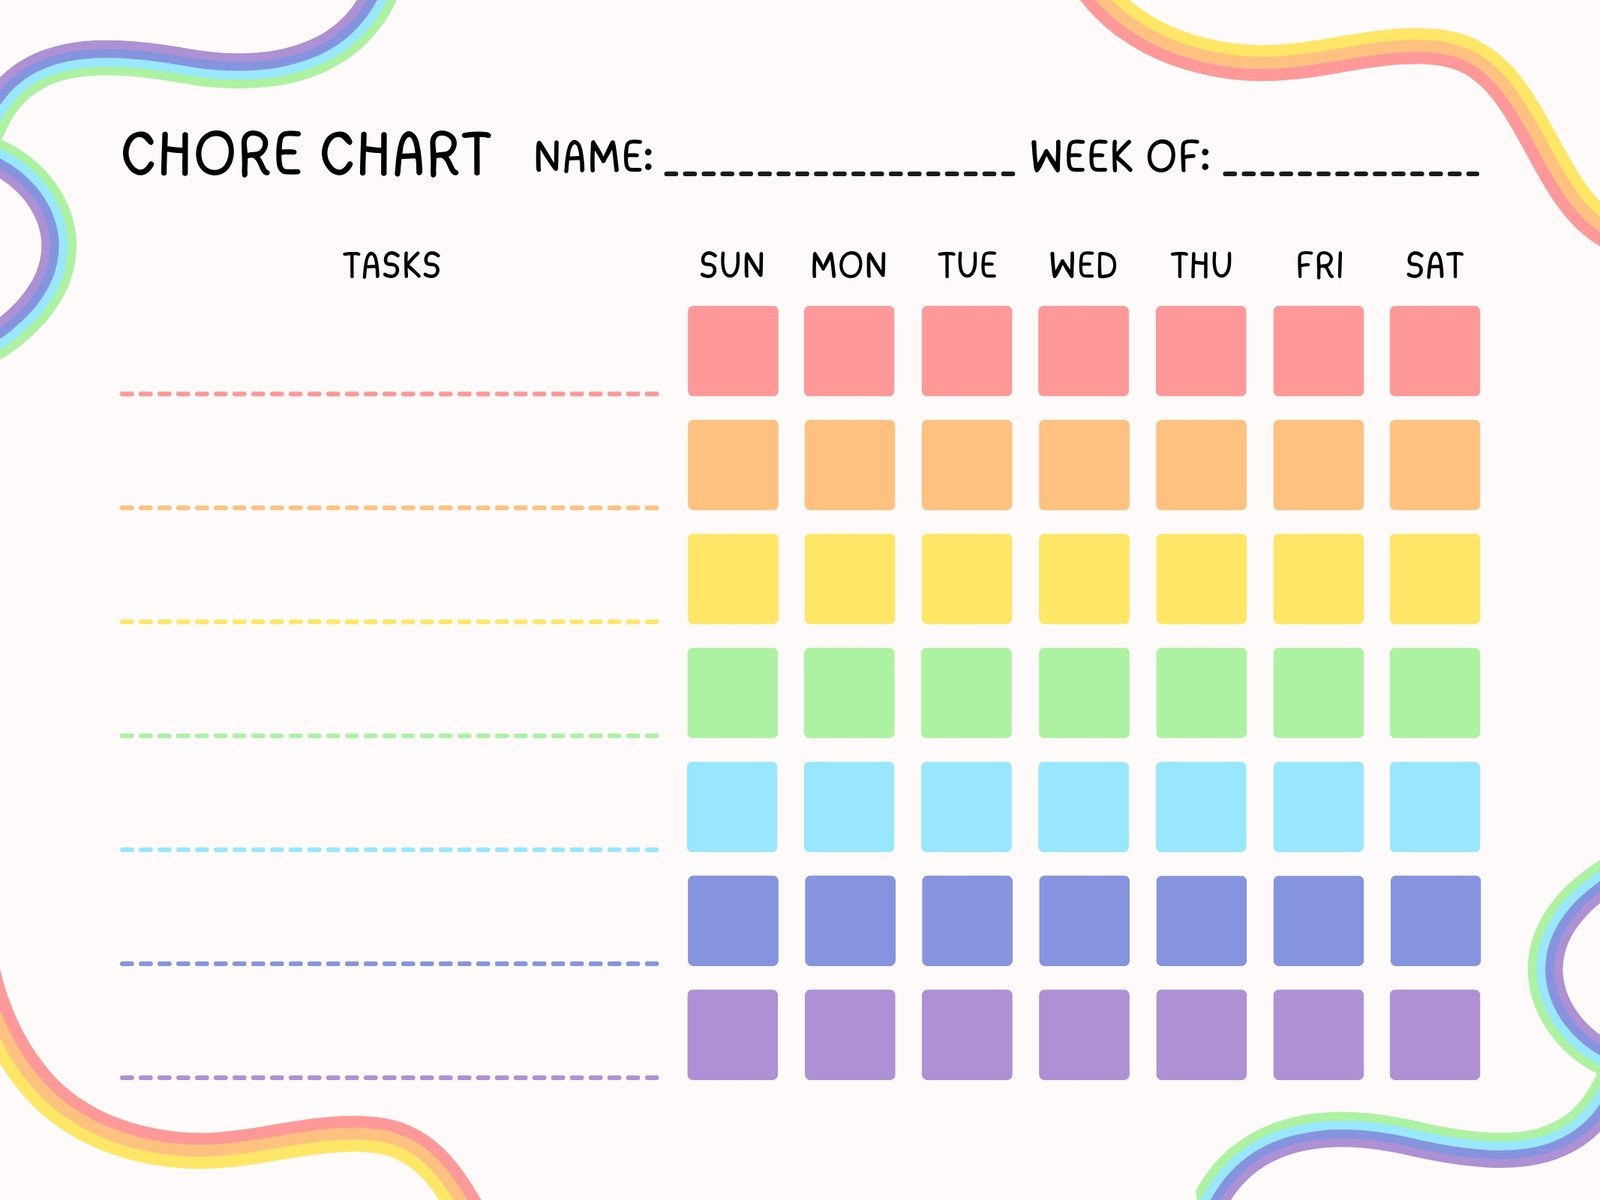 chore-charts-for-husbands-wives-this-has-been-a-great-idea